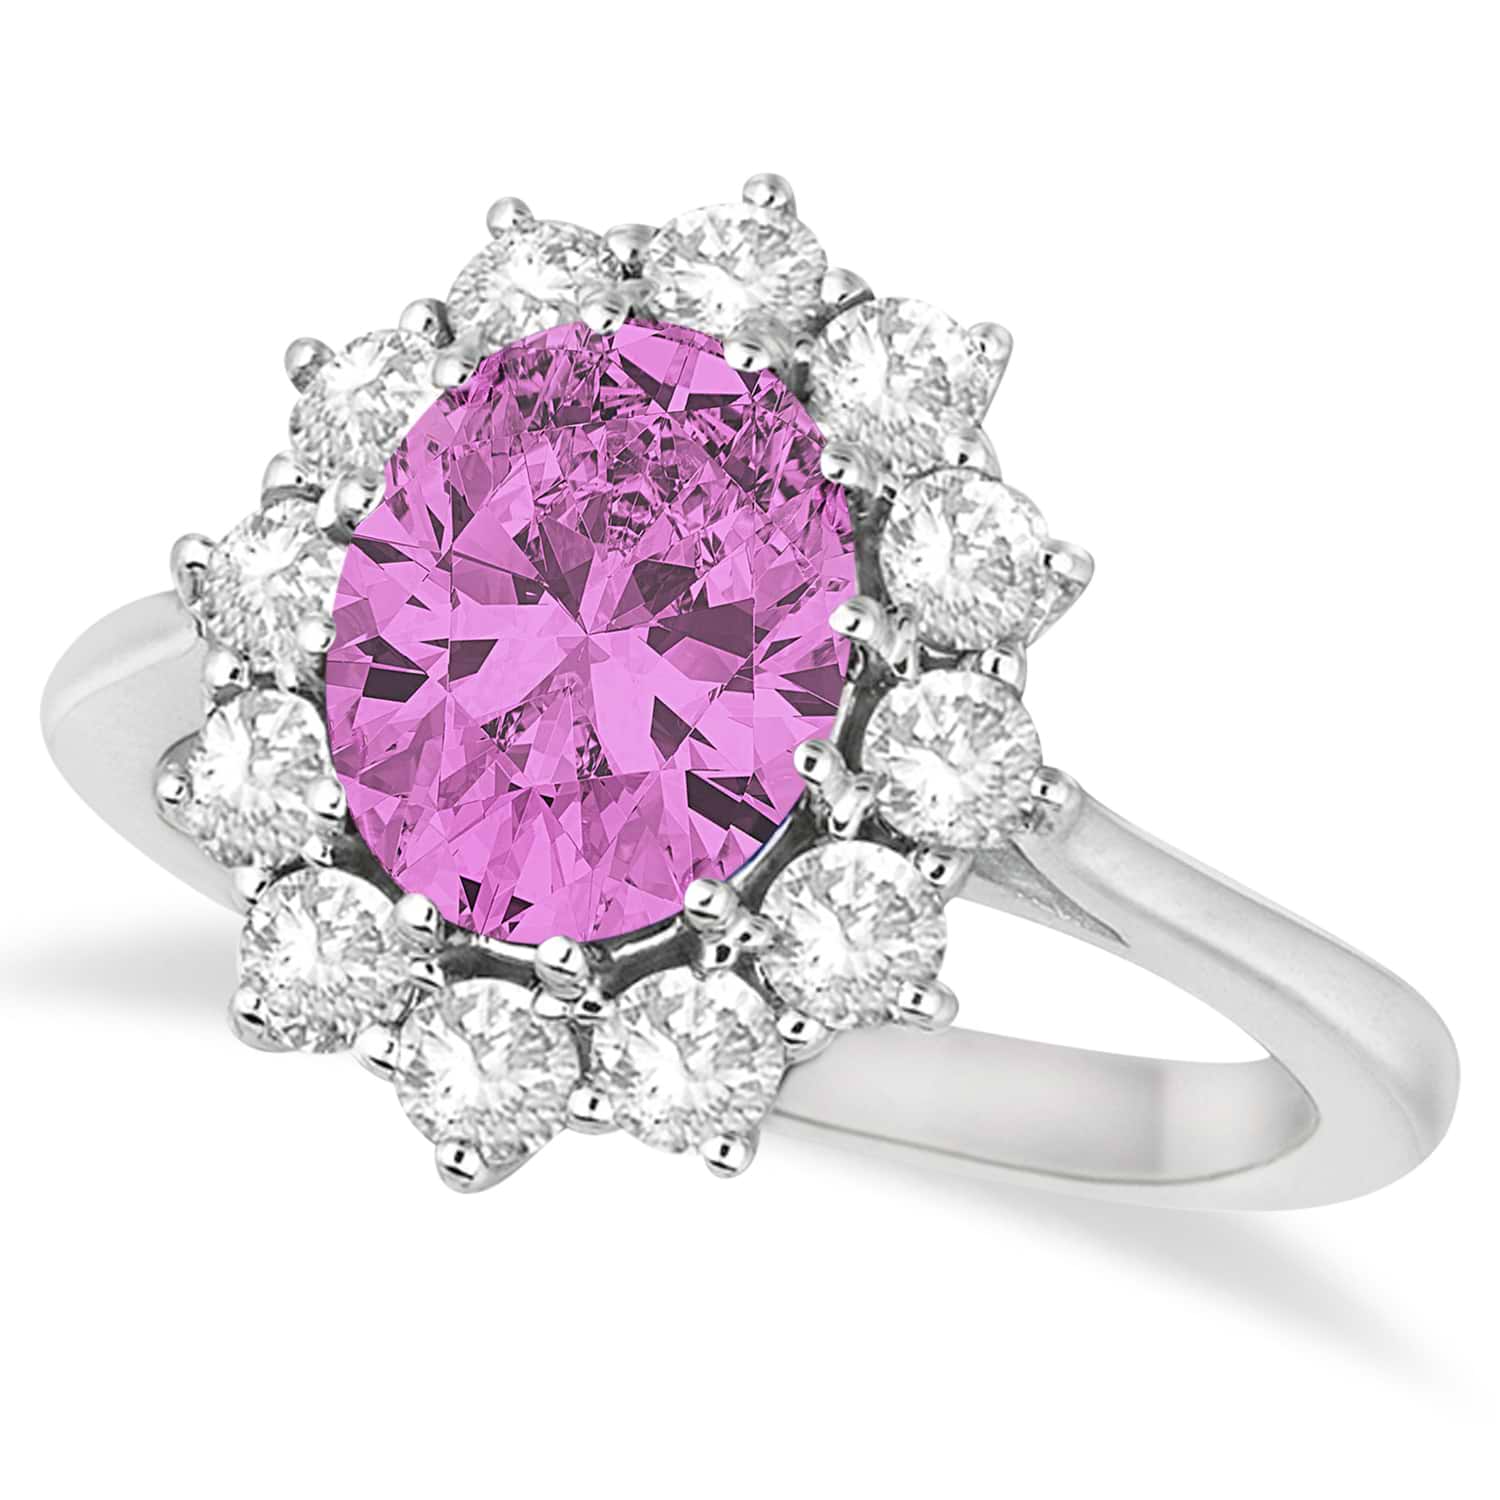 Oval Pink Sapphire & Diamond Accented Ring in 18k White Gold (3.60ctw)